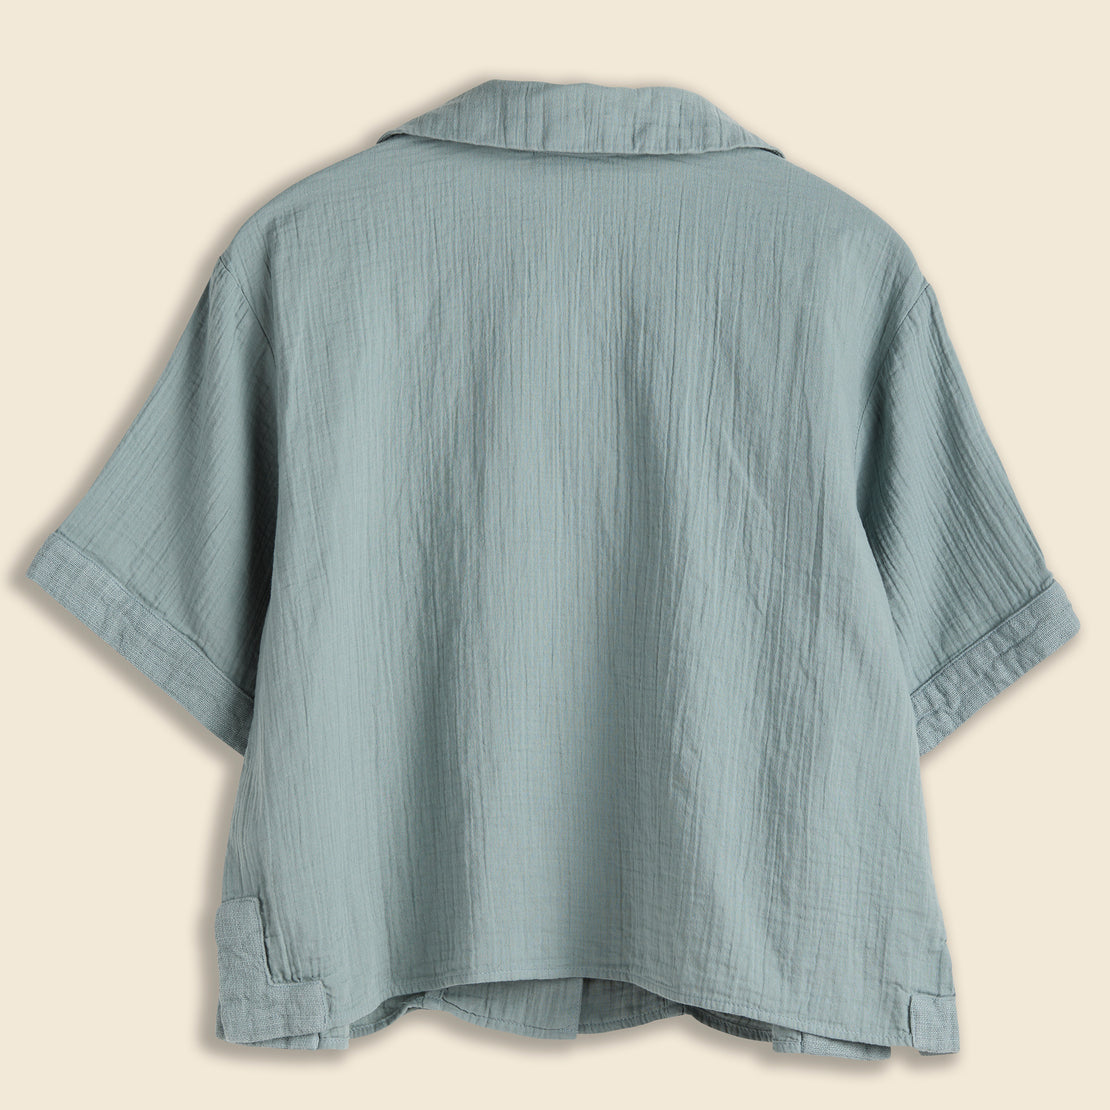 Loraine Top - Tradewinds - Atelier Delphine - STAG Provisions - W - Tops - S/S Woven